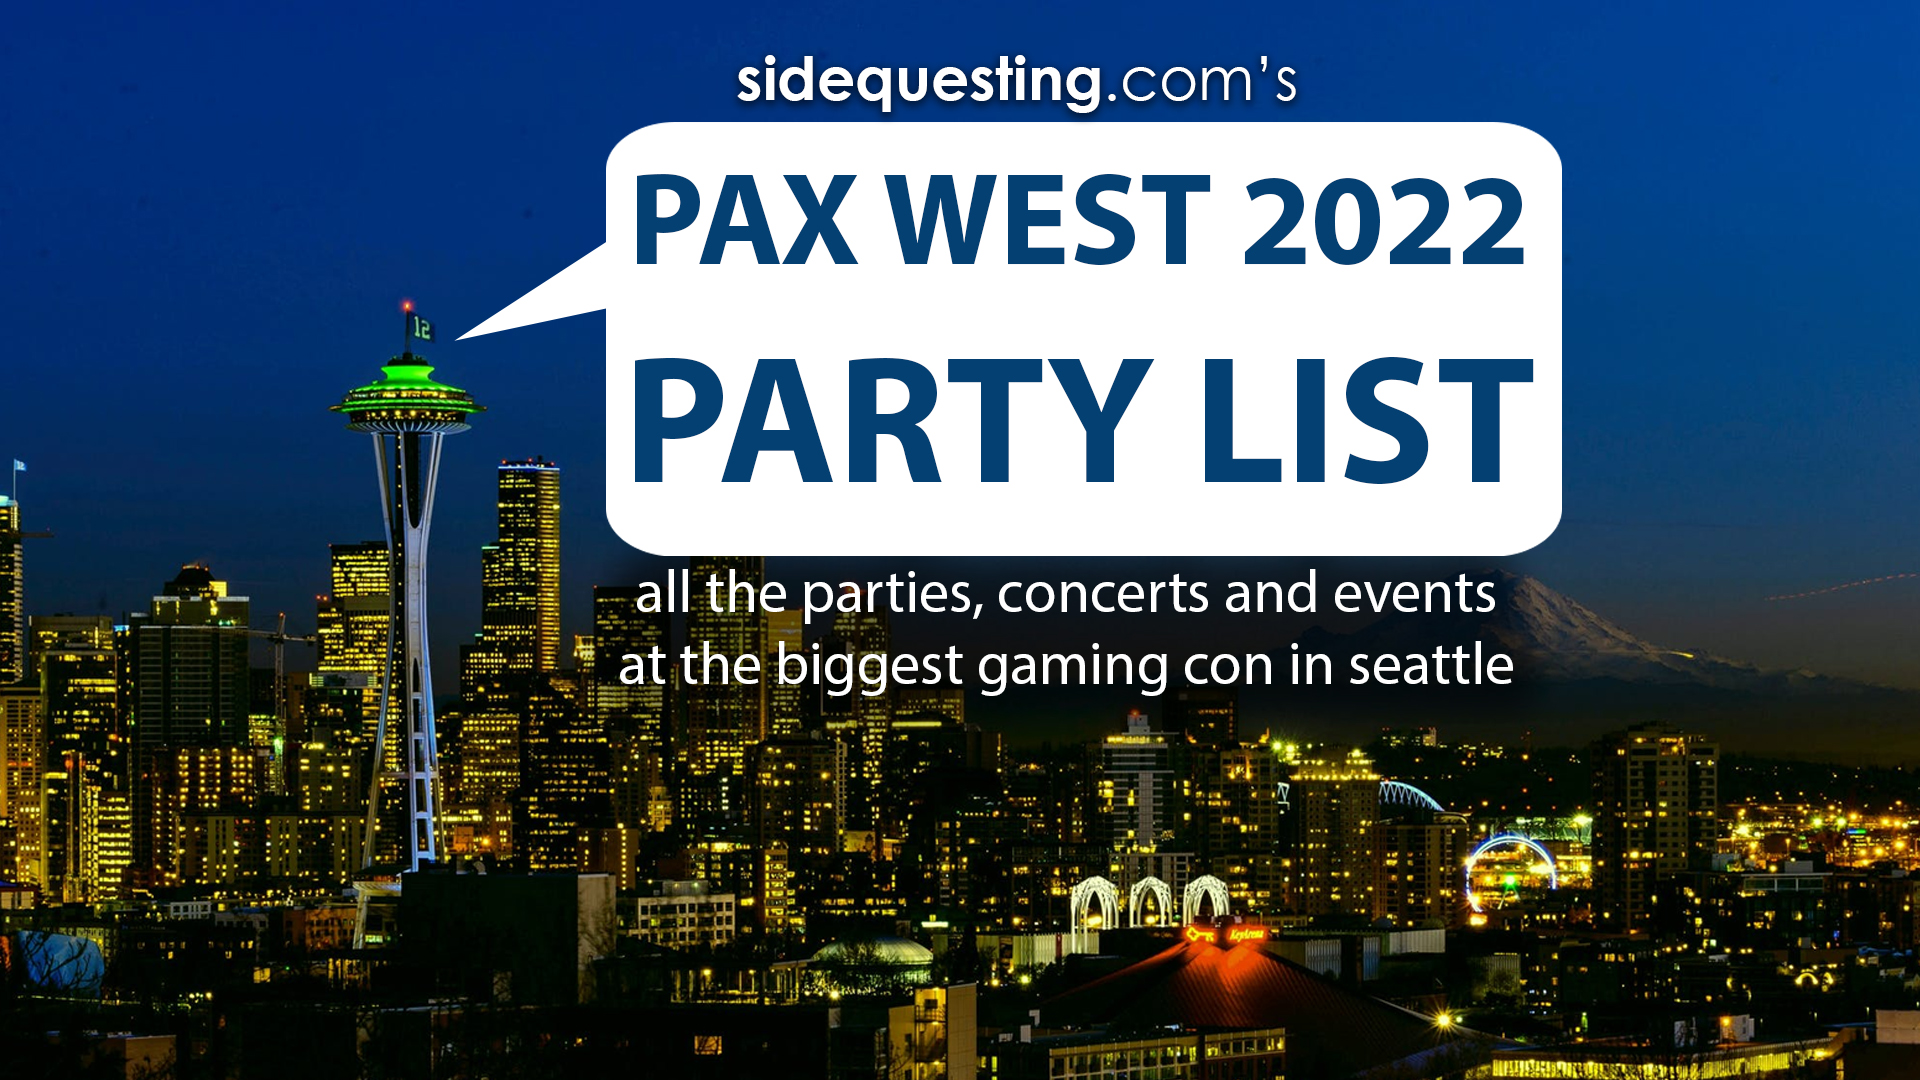 The PAX West 2022 Party List: Your ULTIMATE guide to the parties and events